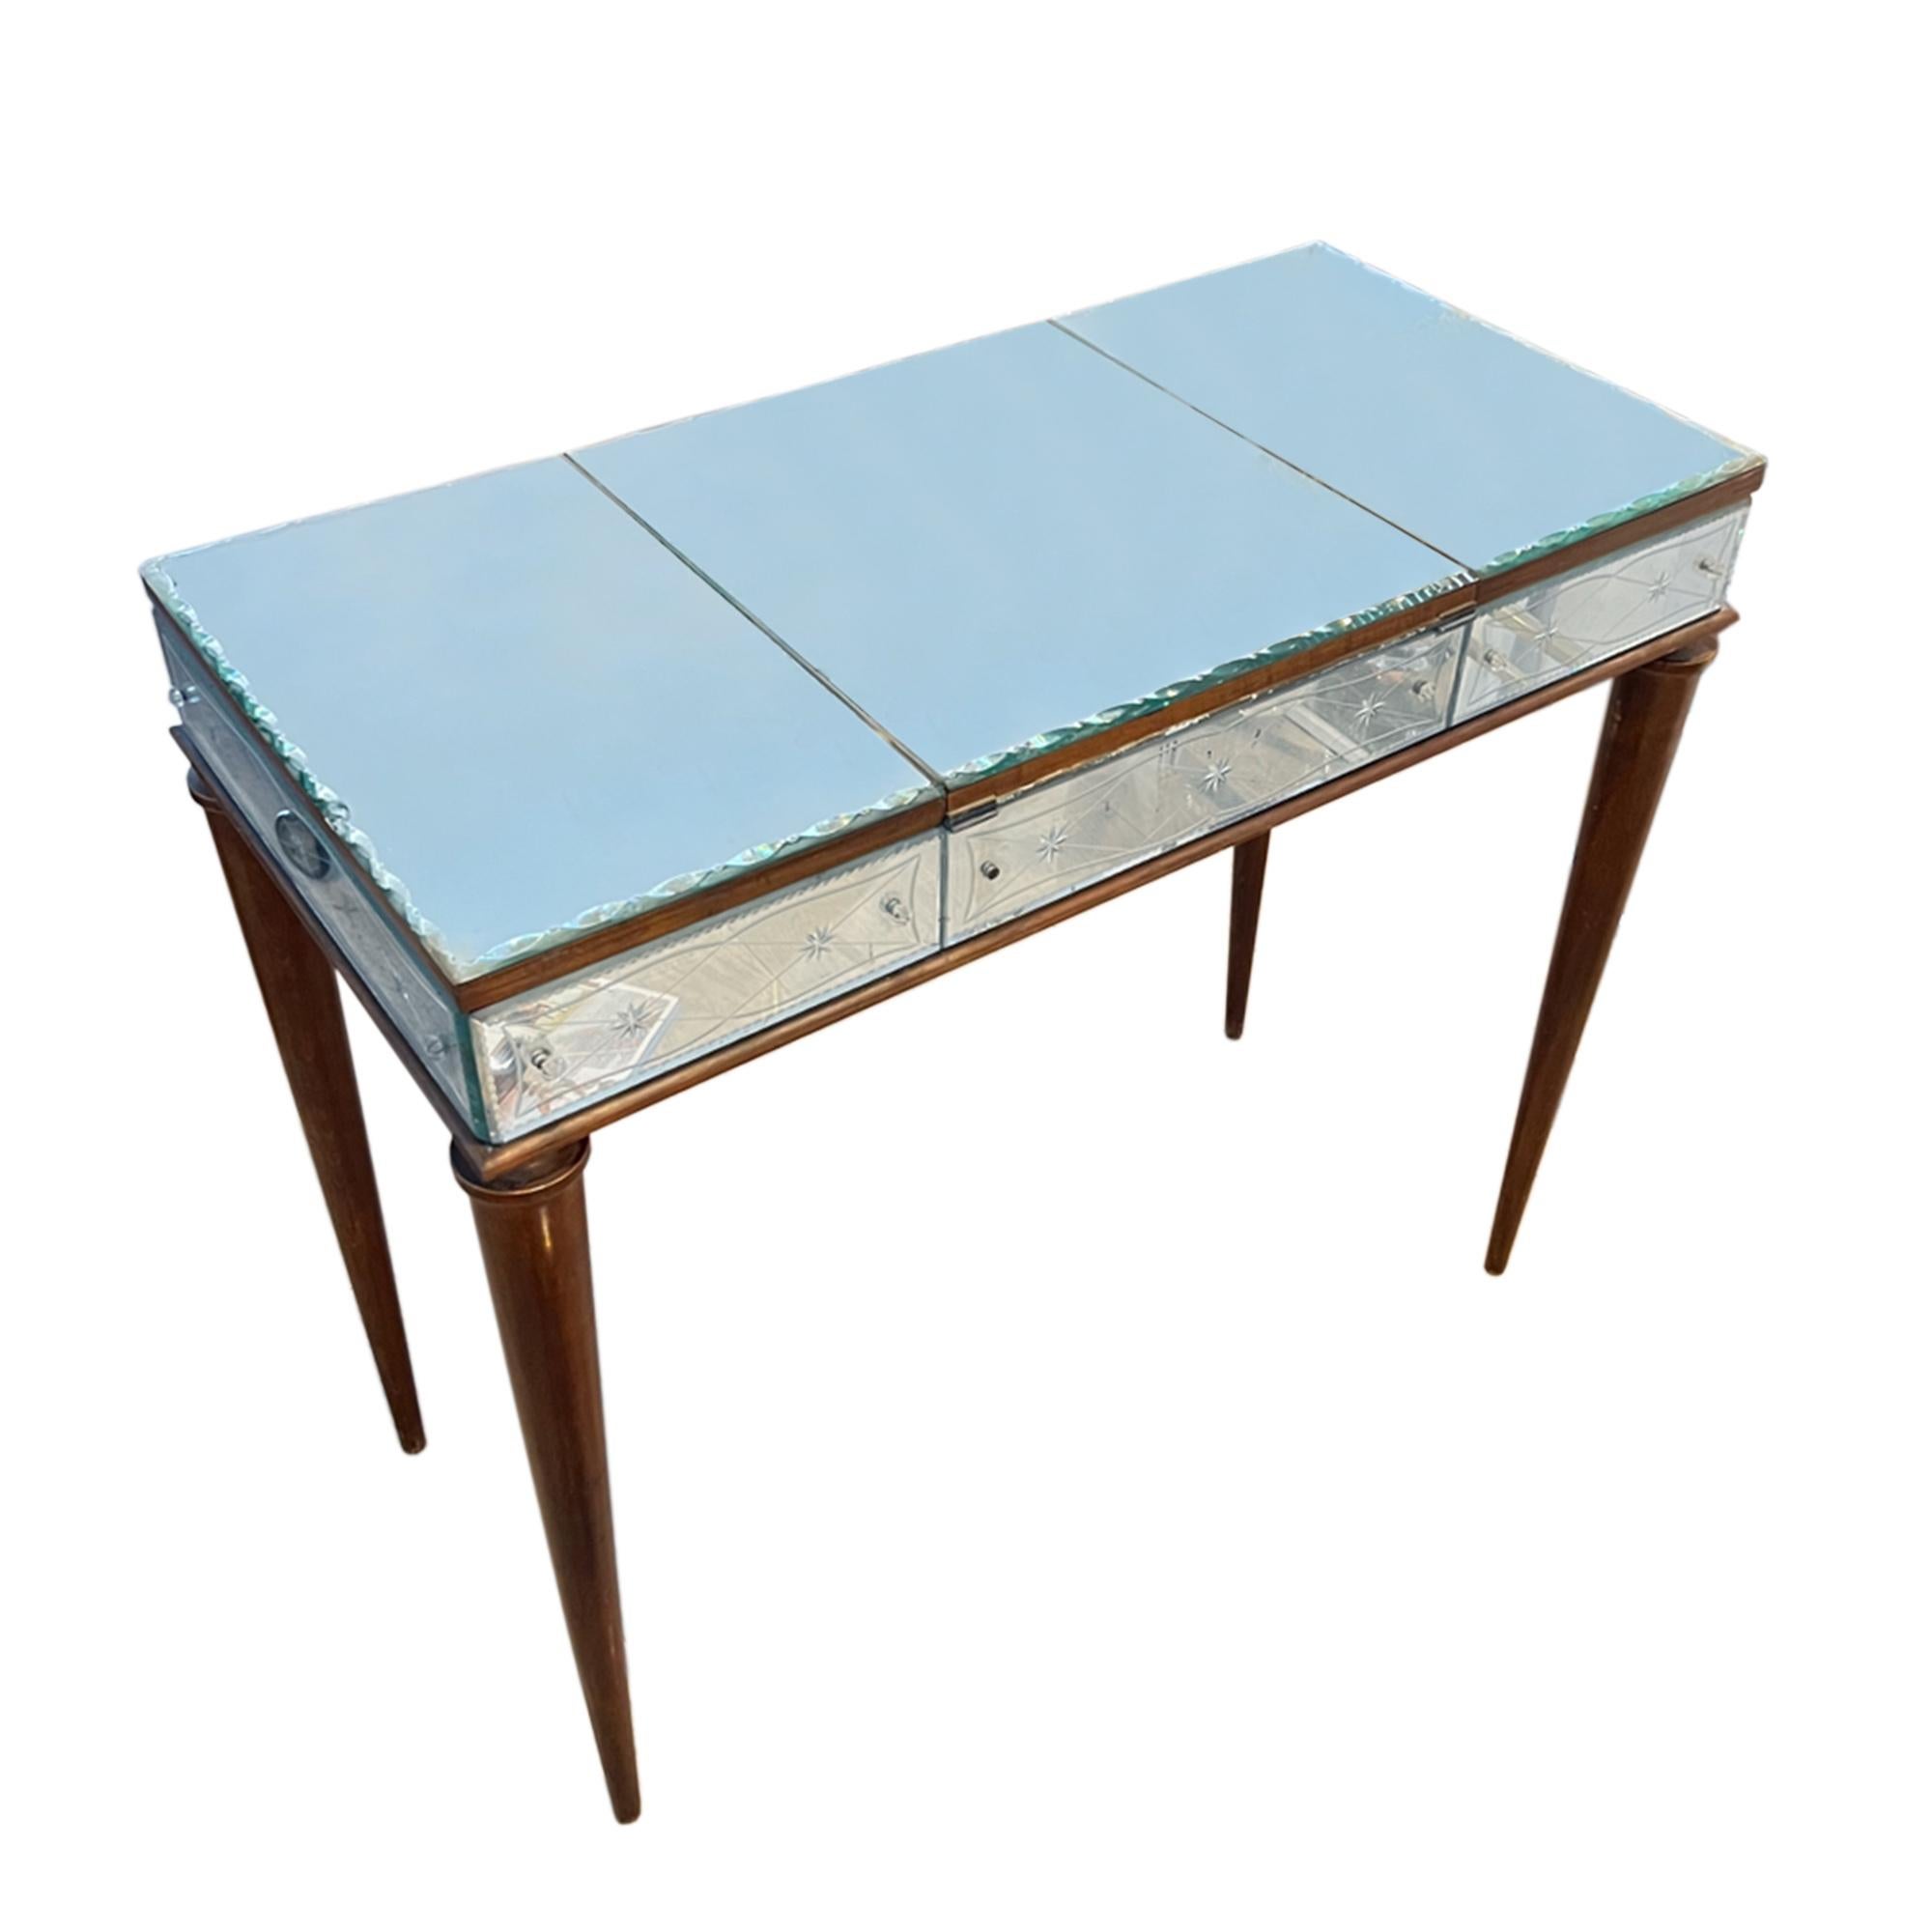 This beautiful dressing table was made in France in the 1960s. 

The top is decorated with a bevelled edge and stars around the sides of the table top. The lid in the middle lifts to reveal a mirror and storage space. The mirror is 31.5cm high and